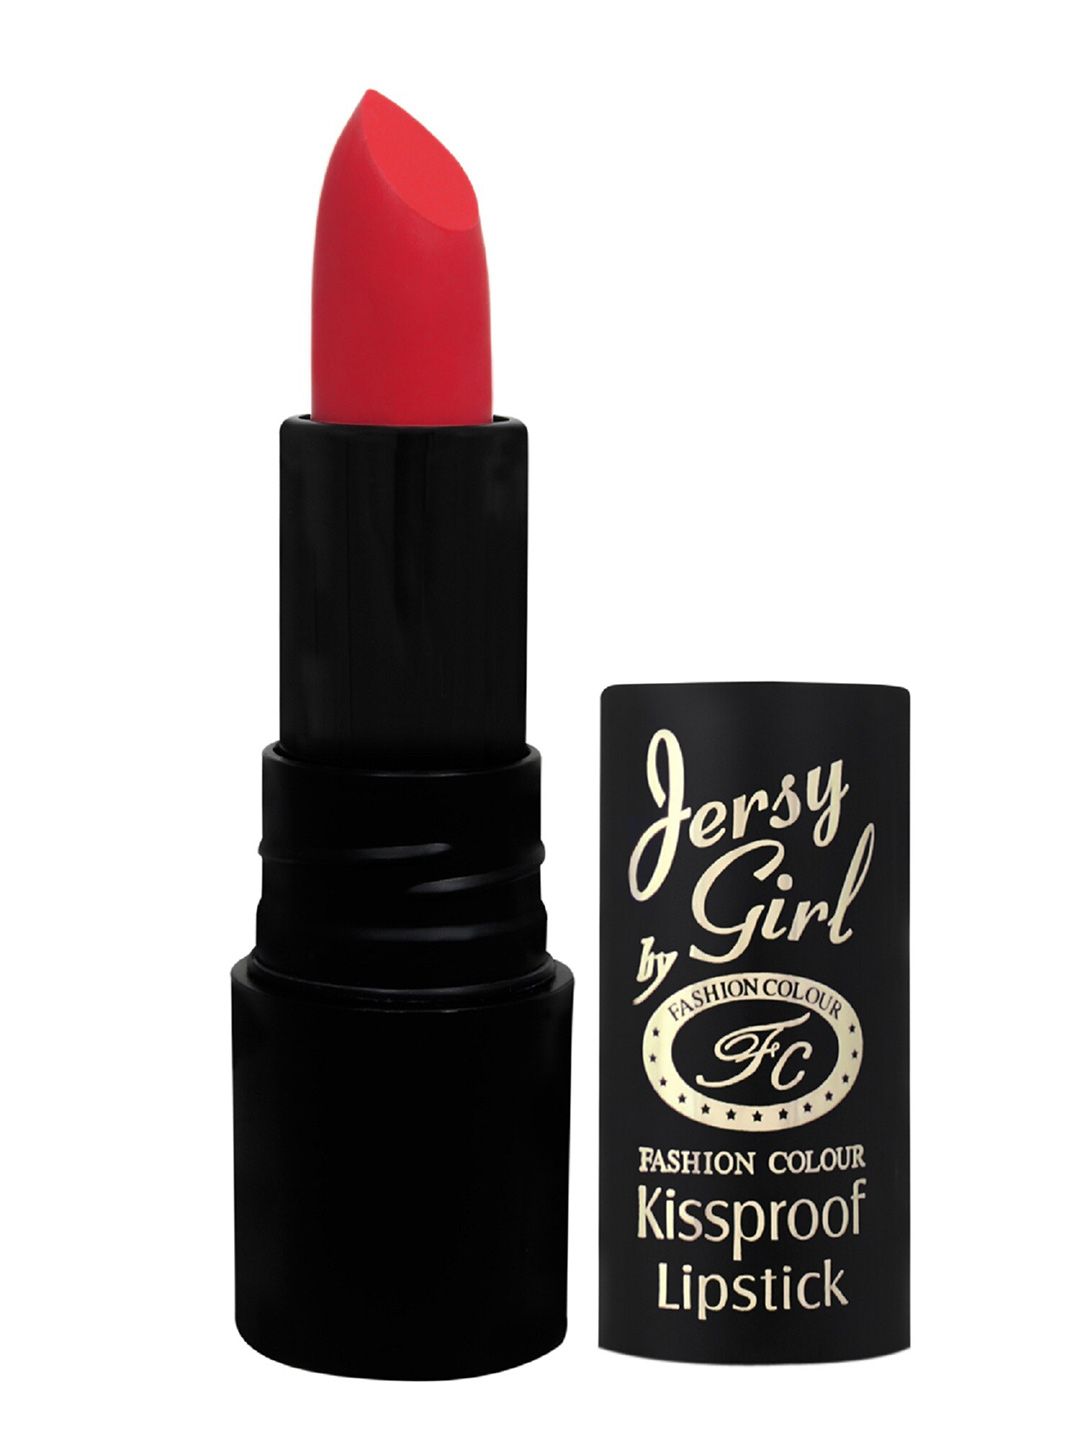 Fashion Colour Jersy Girl Kiss proof Lipstick - Orange Red 11 3.8 g Price in India